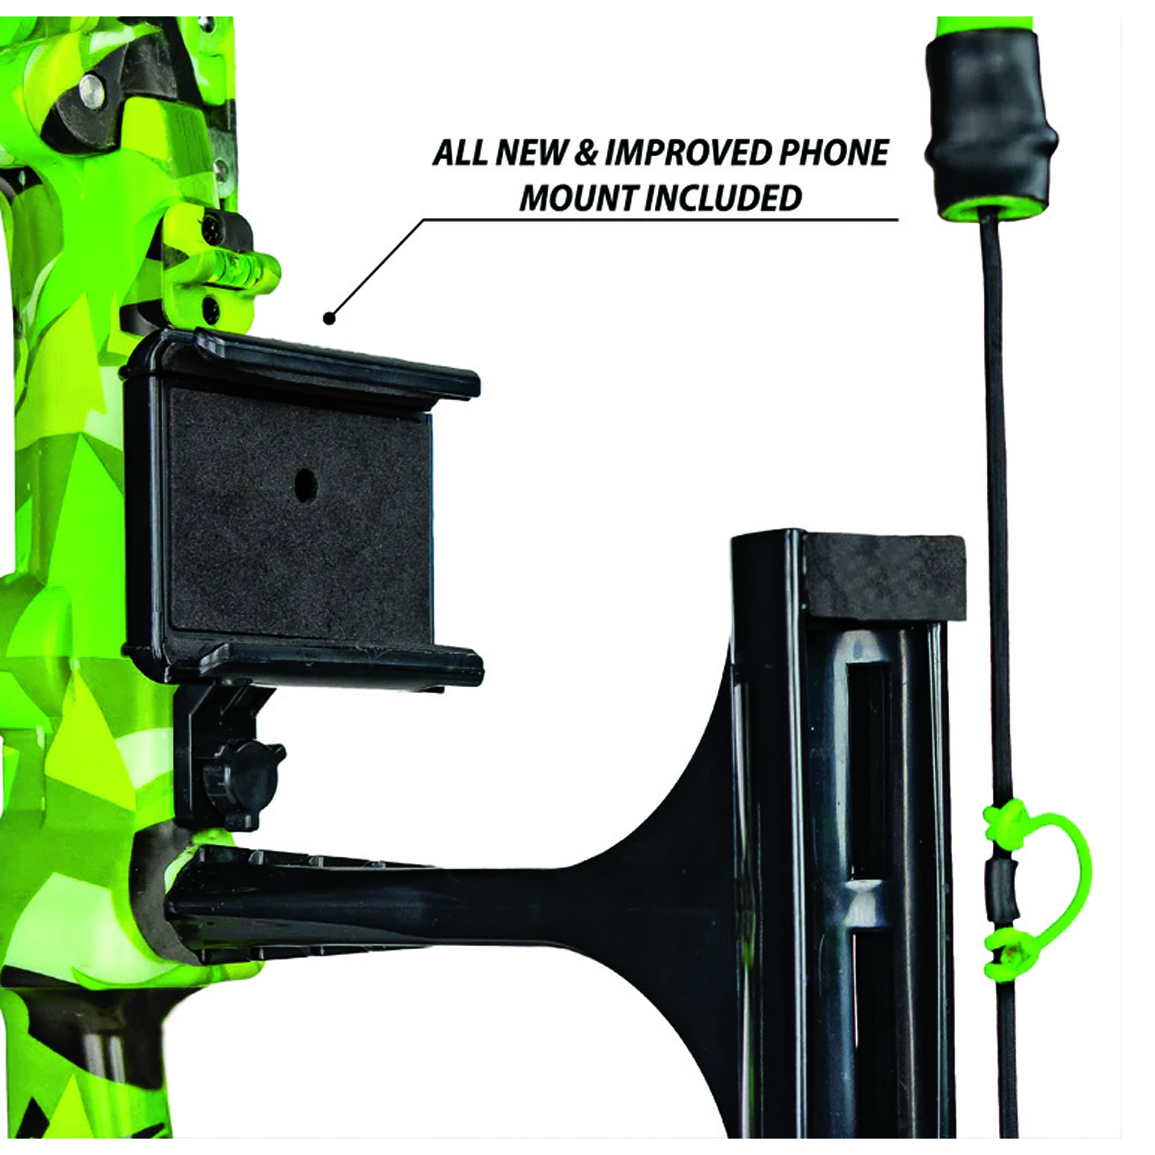 AccuBow 2.0 Green Mantis Archery Trainer